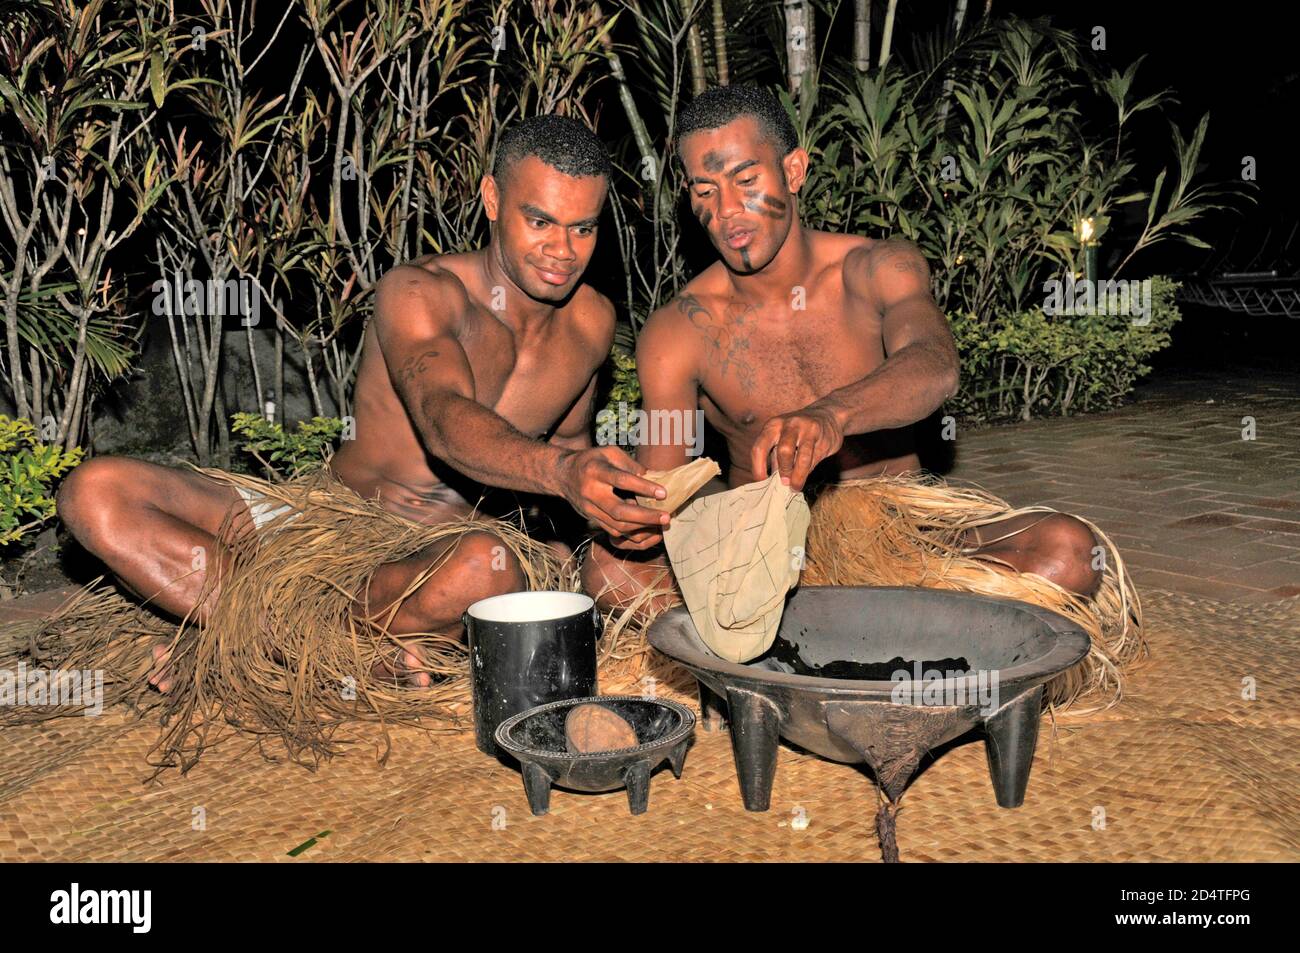 Two Fijians squat on matting at a tourist show to serve Fiji's national drink, Yaqona, also called Kava in Fiji in the South Pacific.   Yaqona or Kava Stock Photo